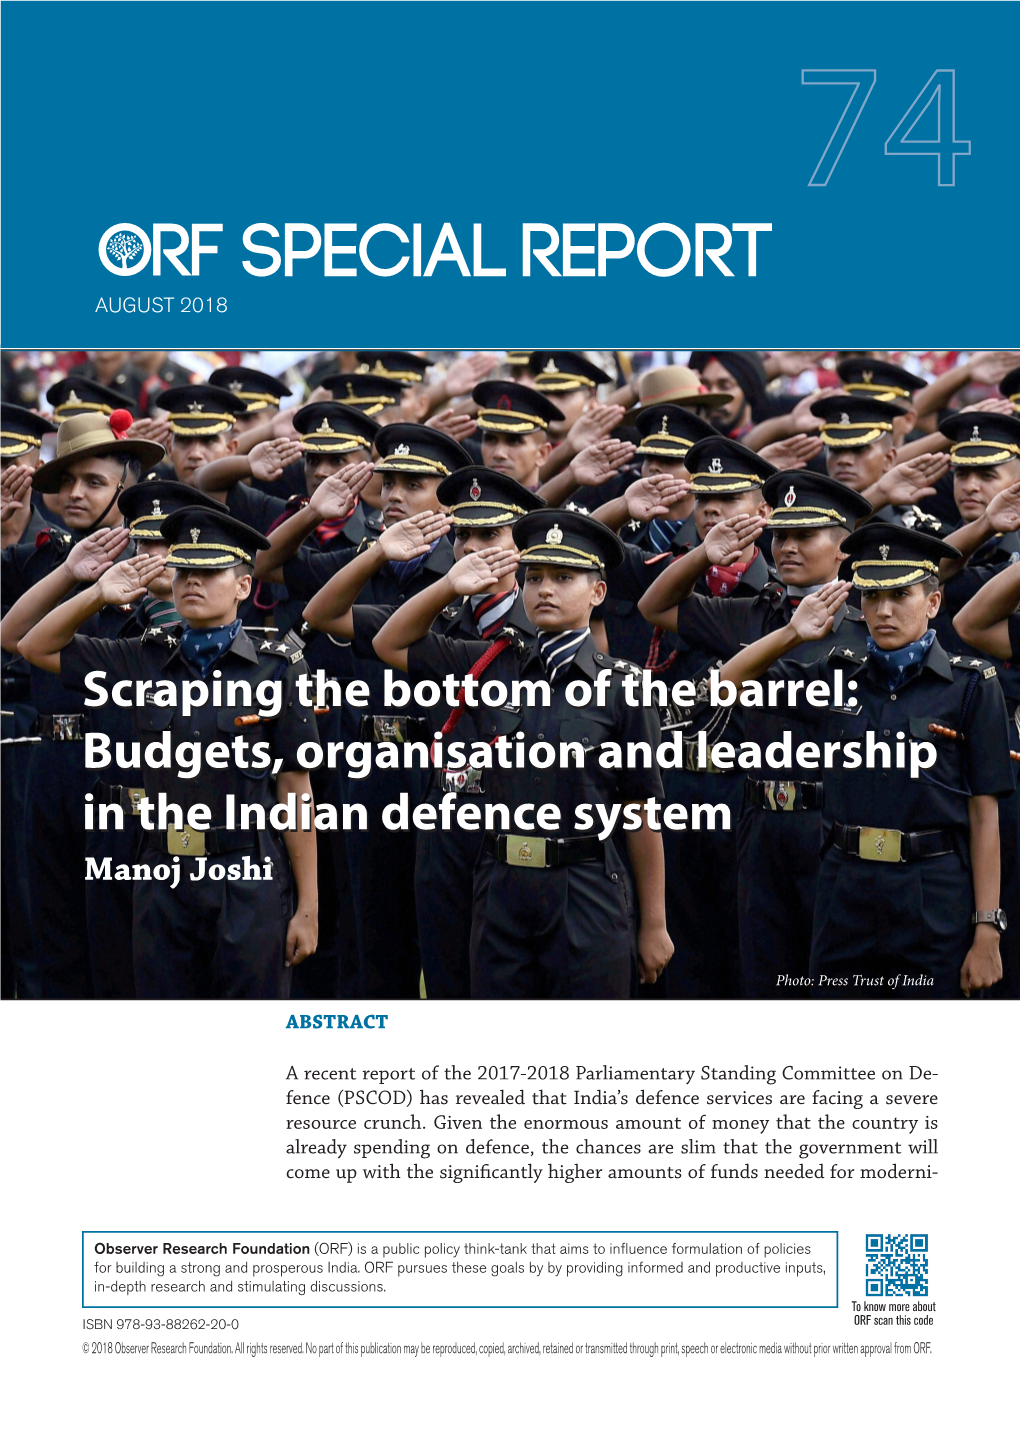 Budgets, Organisation and Leadership in the Indian Defence System Scraping the Bottom Of